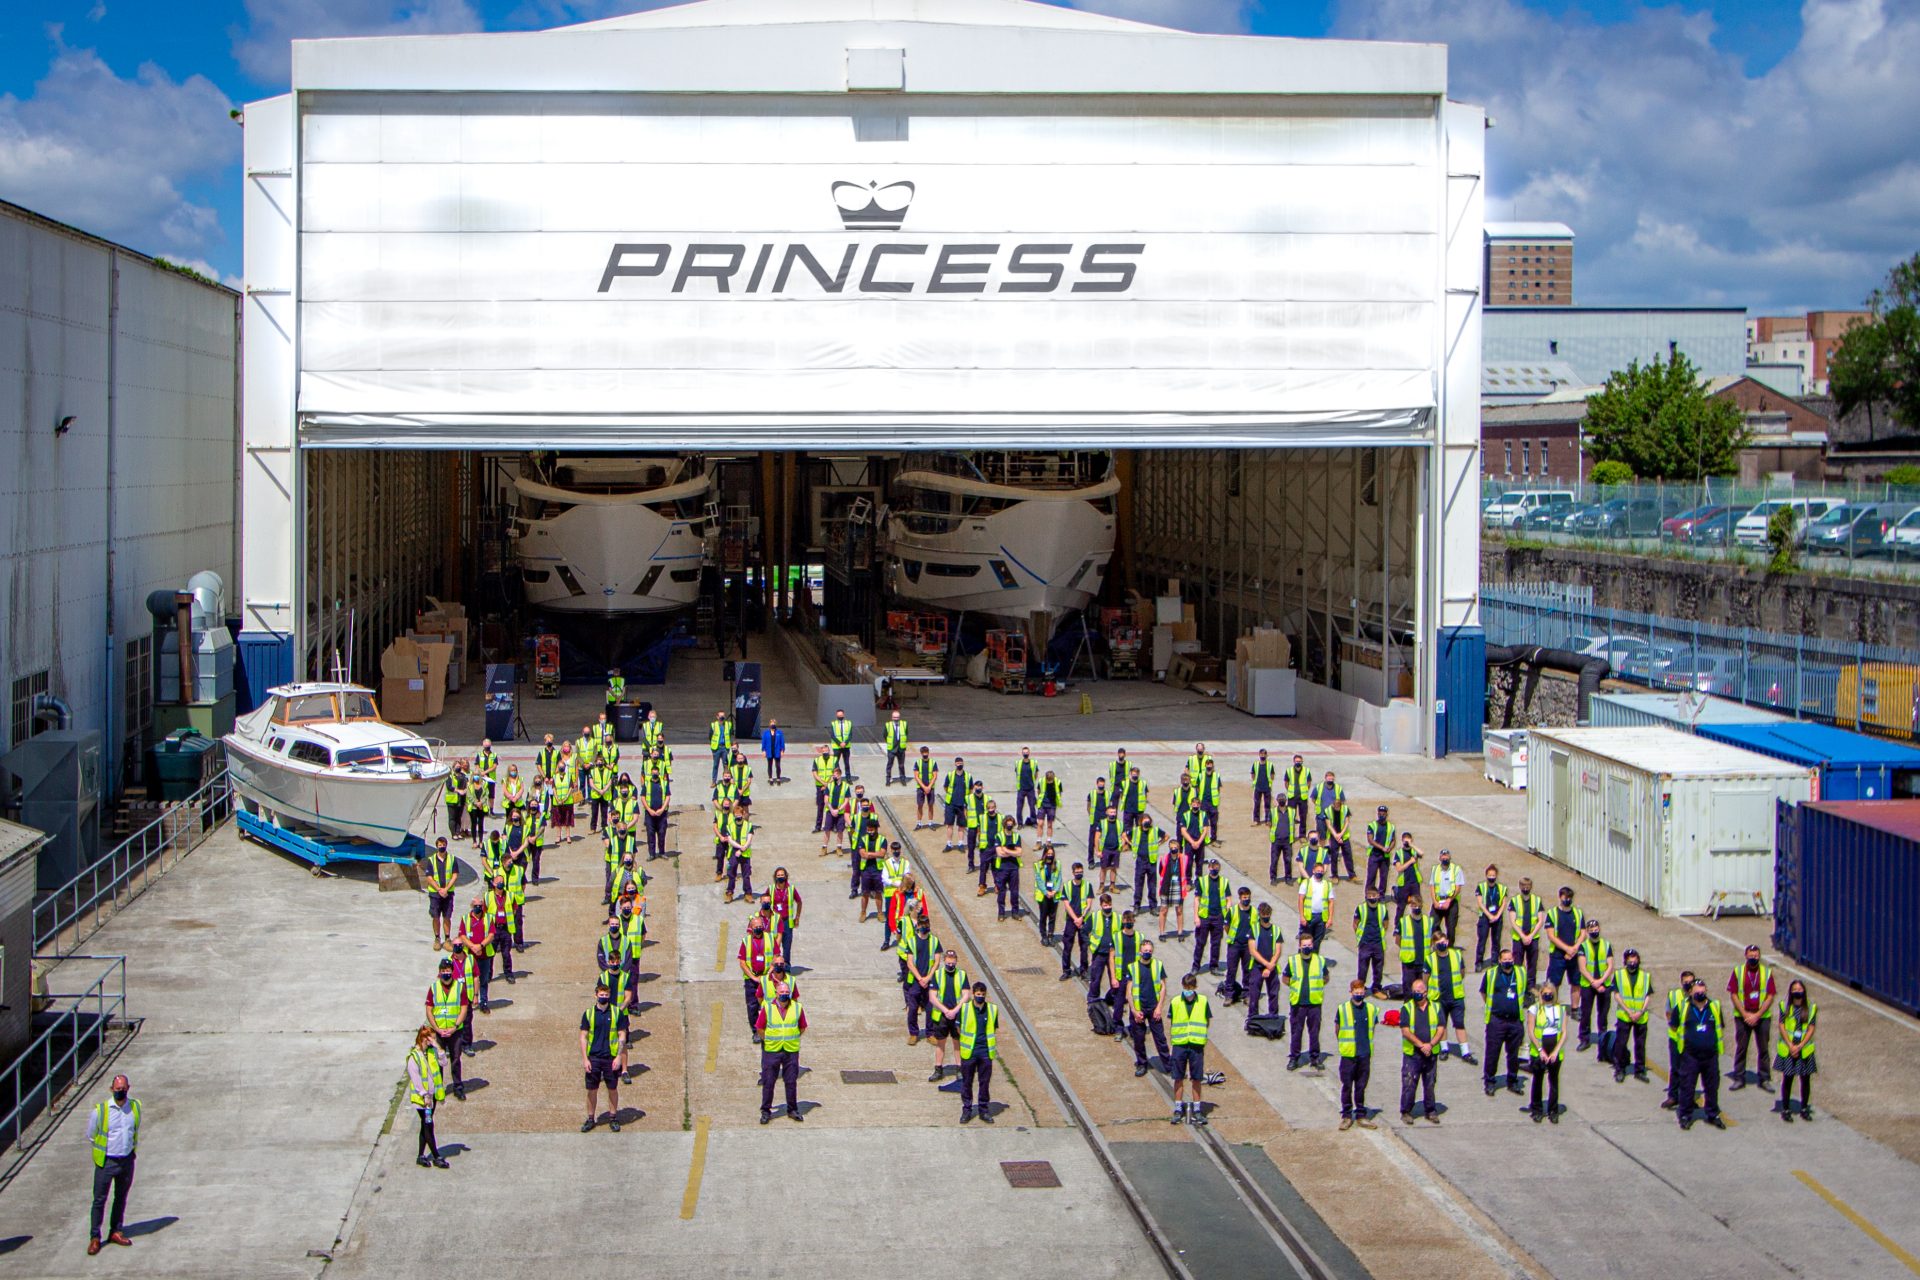 Princess Yachts employees standing in front of super yachts